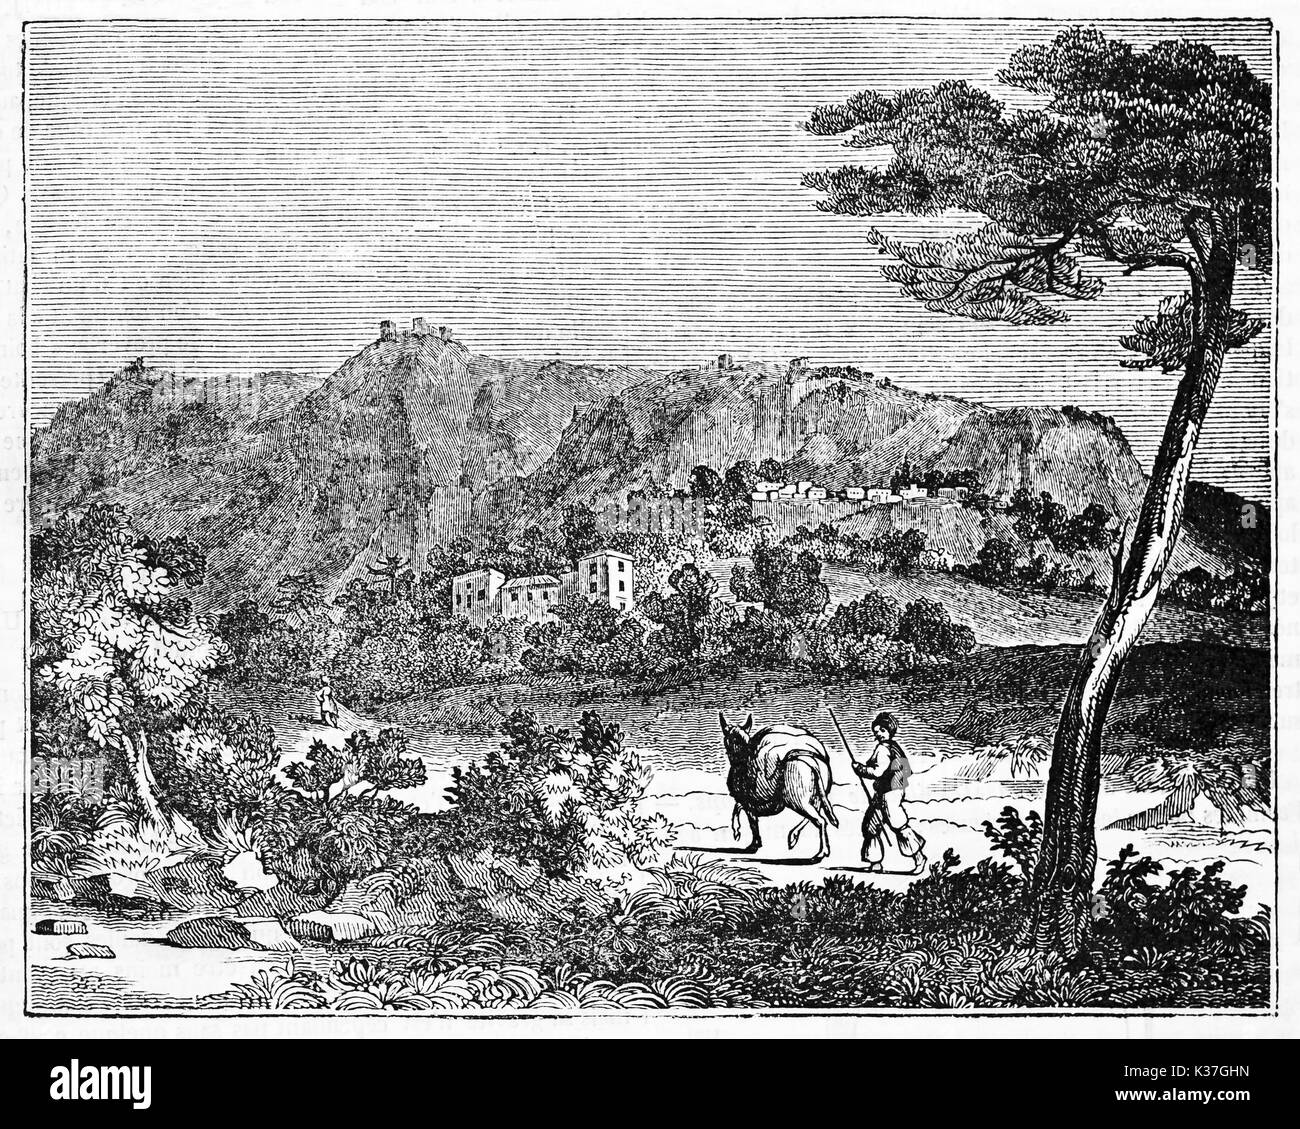 Ancient man travelling with his mule on a country path to San Marino mountain. Old Illustration by unidentified author published on Magasin Pittoresque Paris 1834 Stock Photo